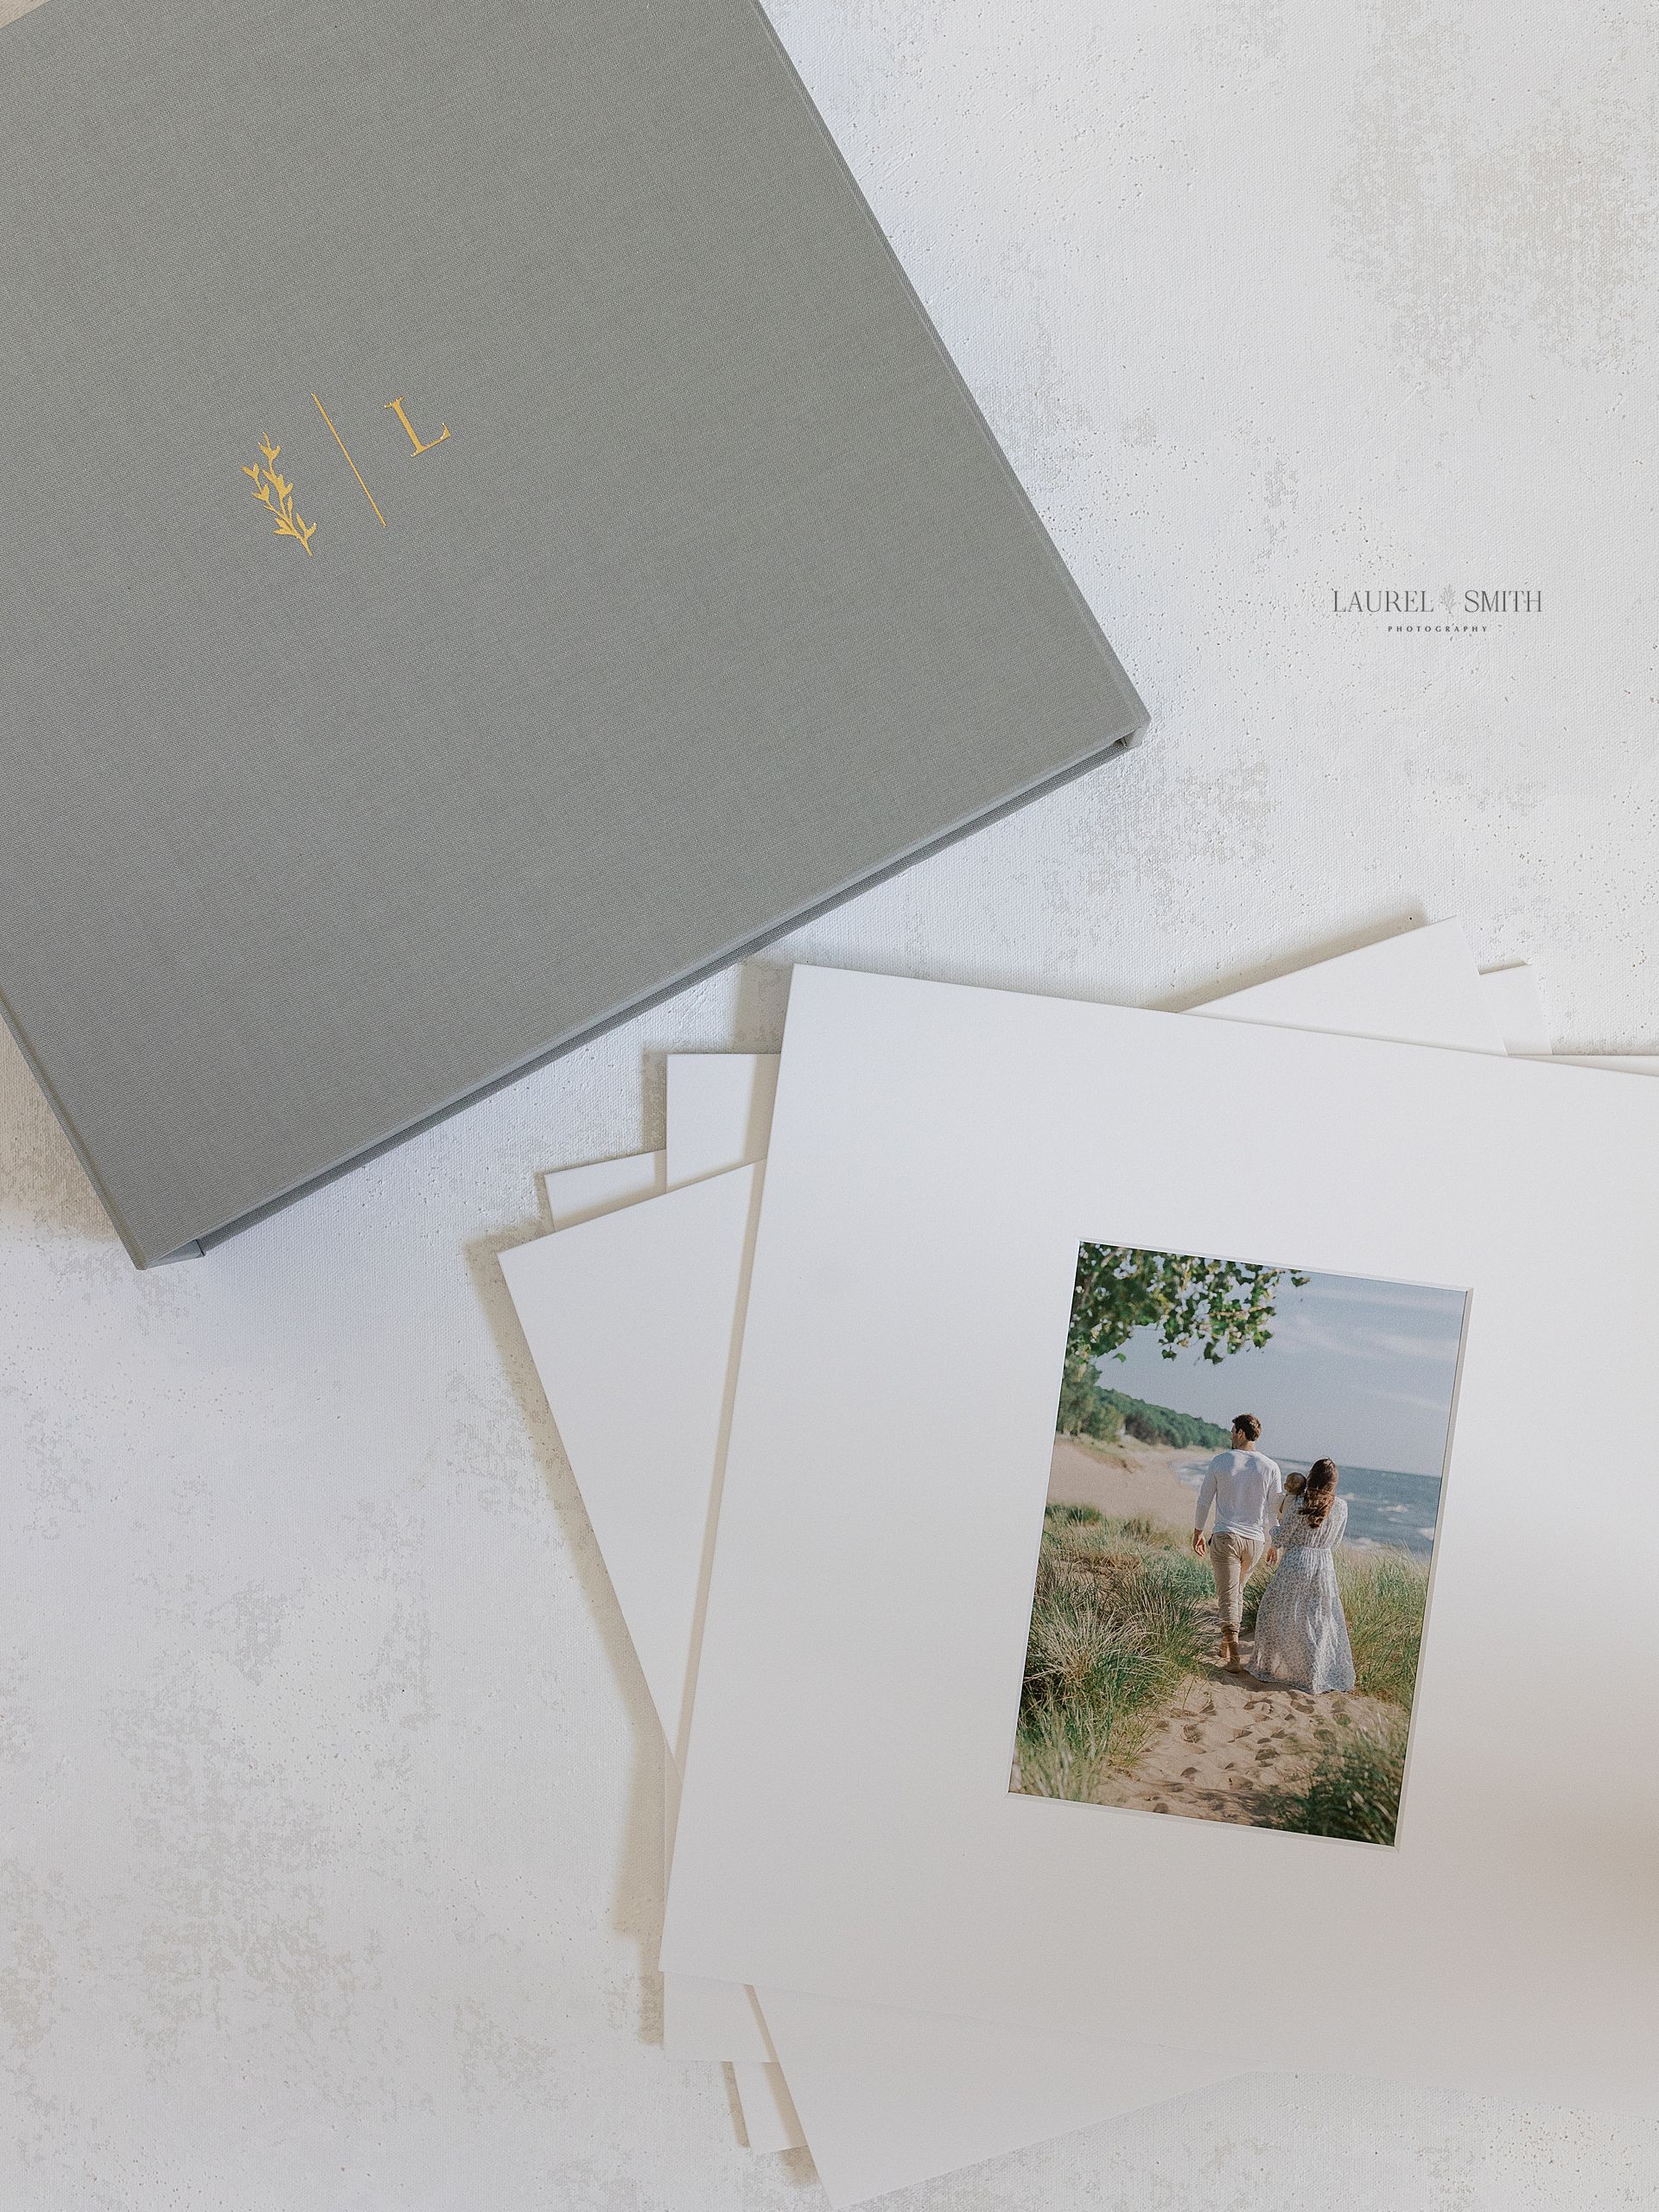 Matted print images of family walking on beach next to folio box.